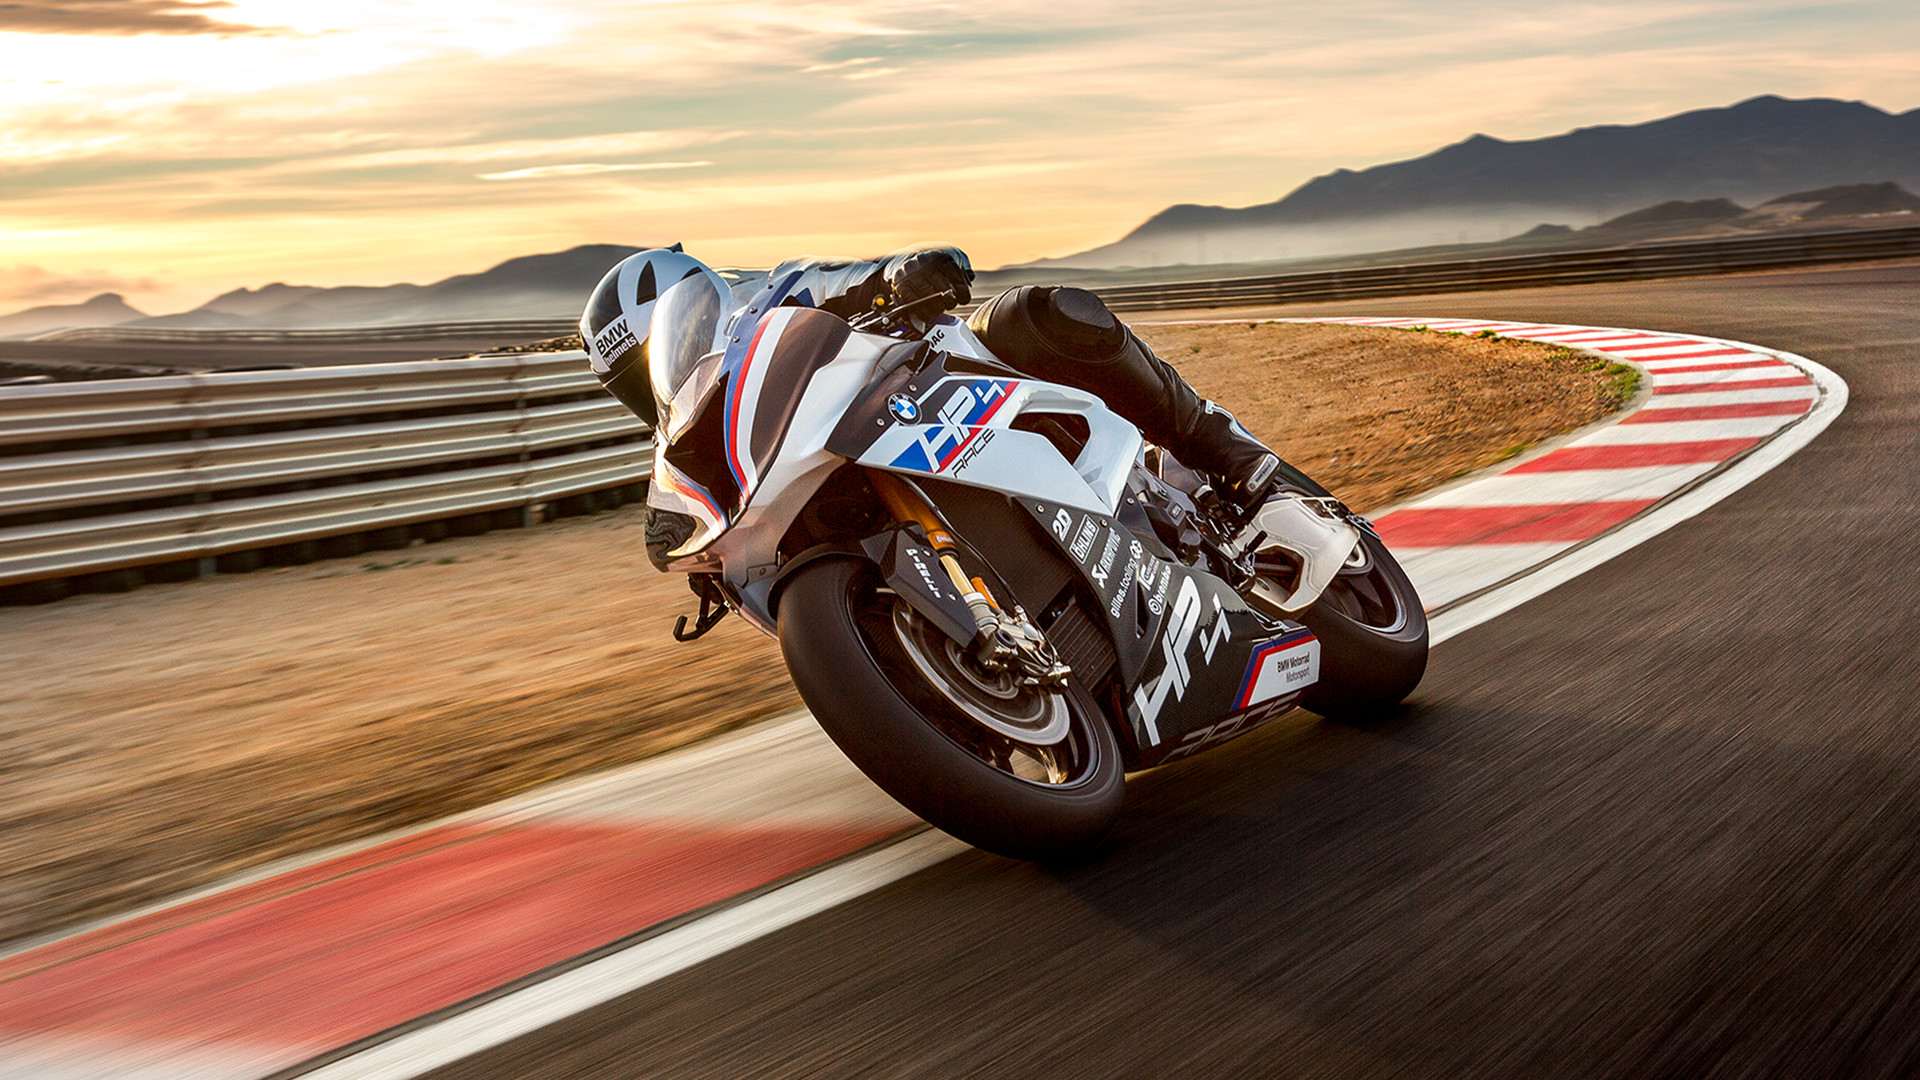 HP4 Race Track Motorcycle